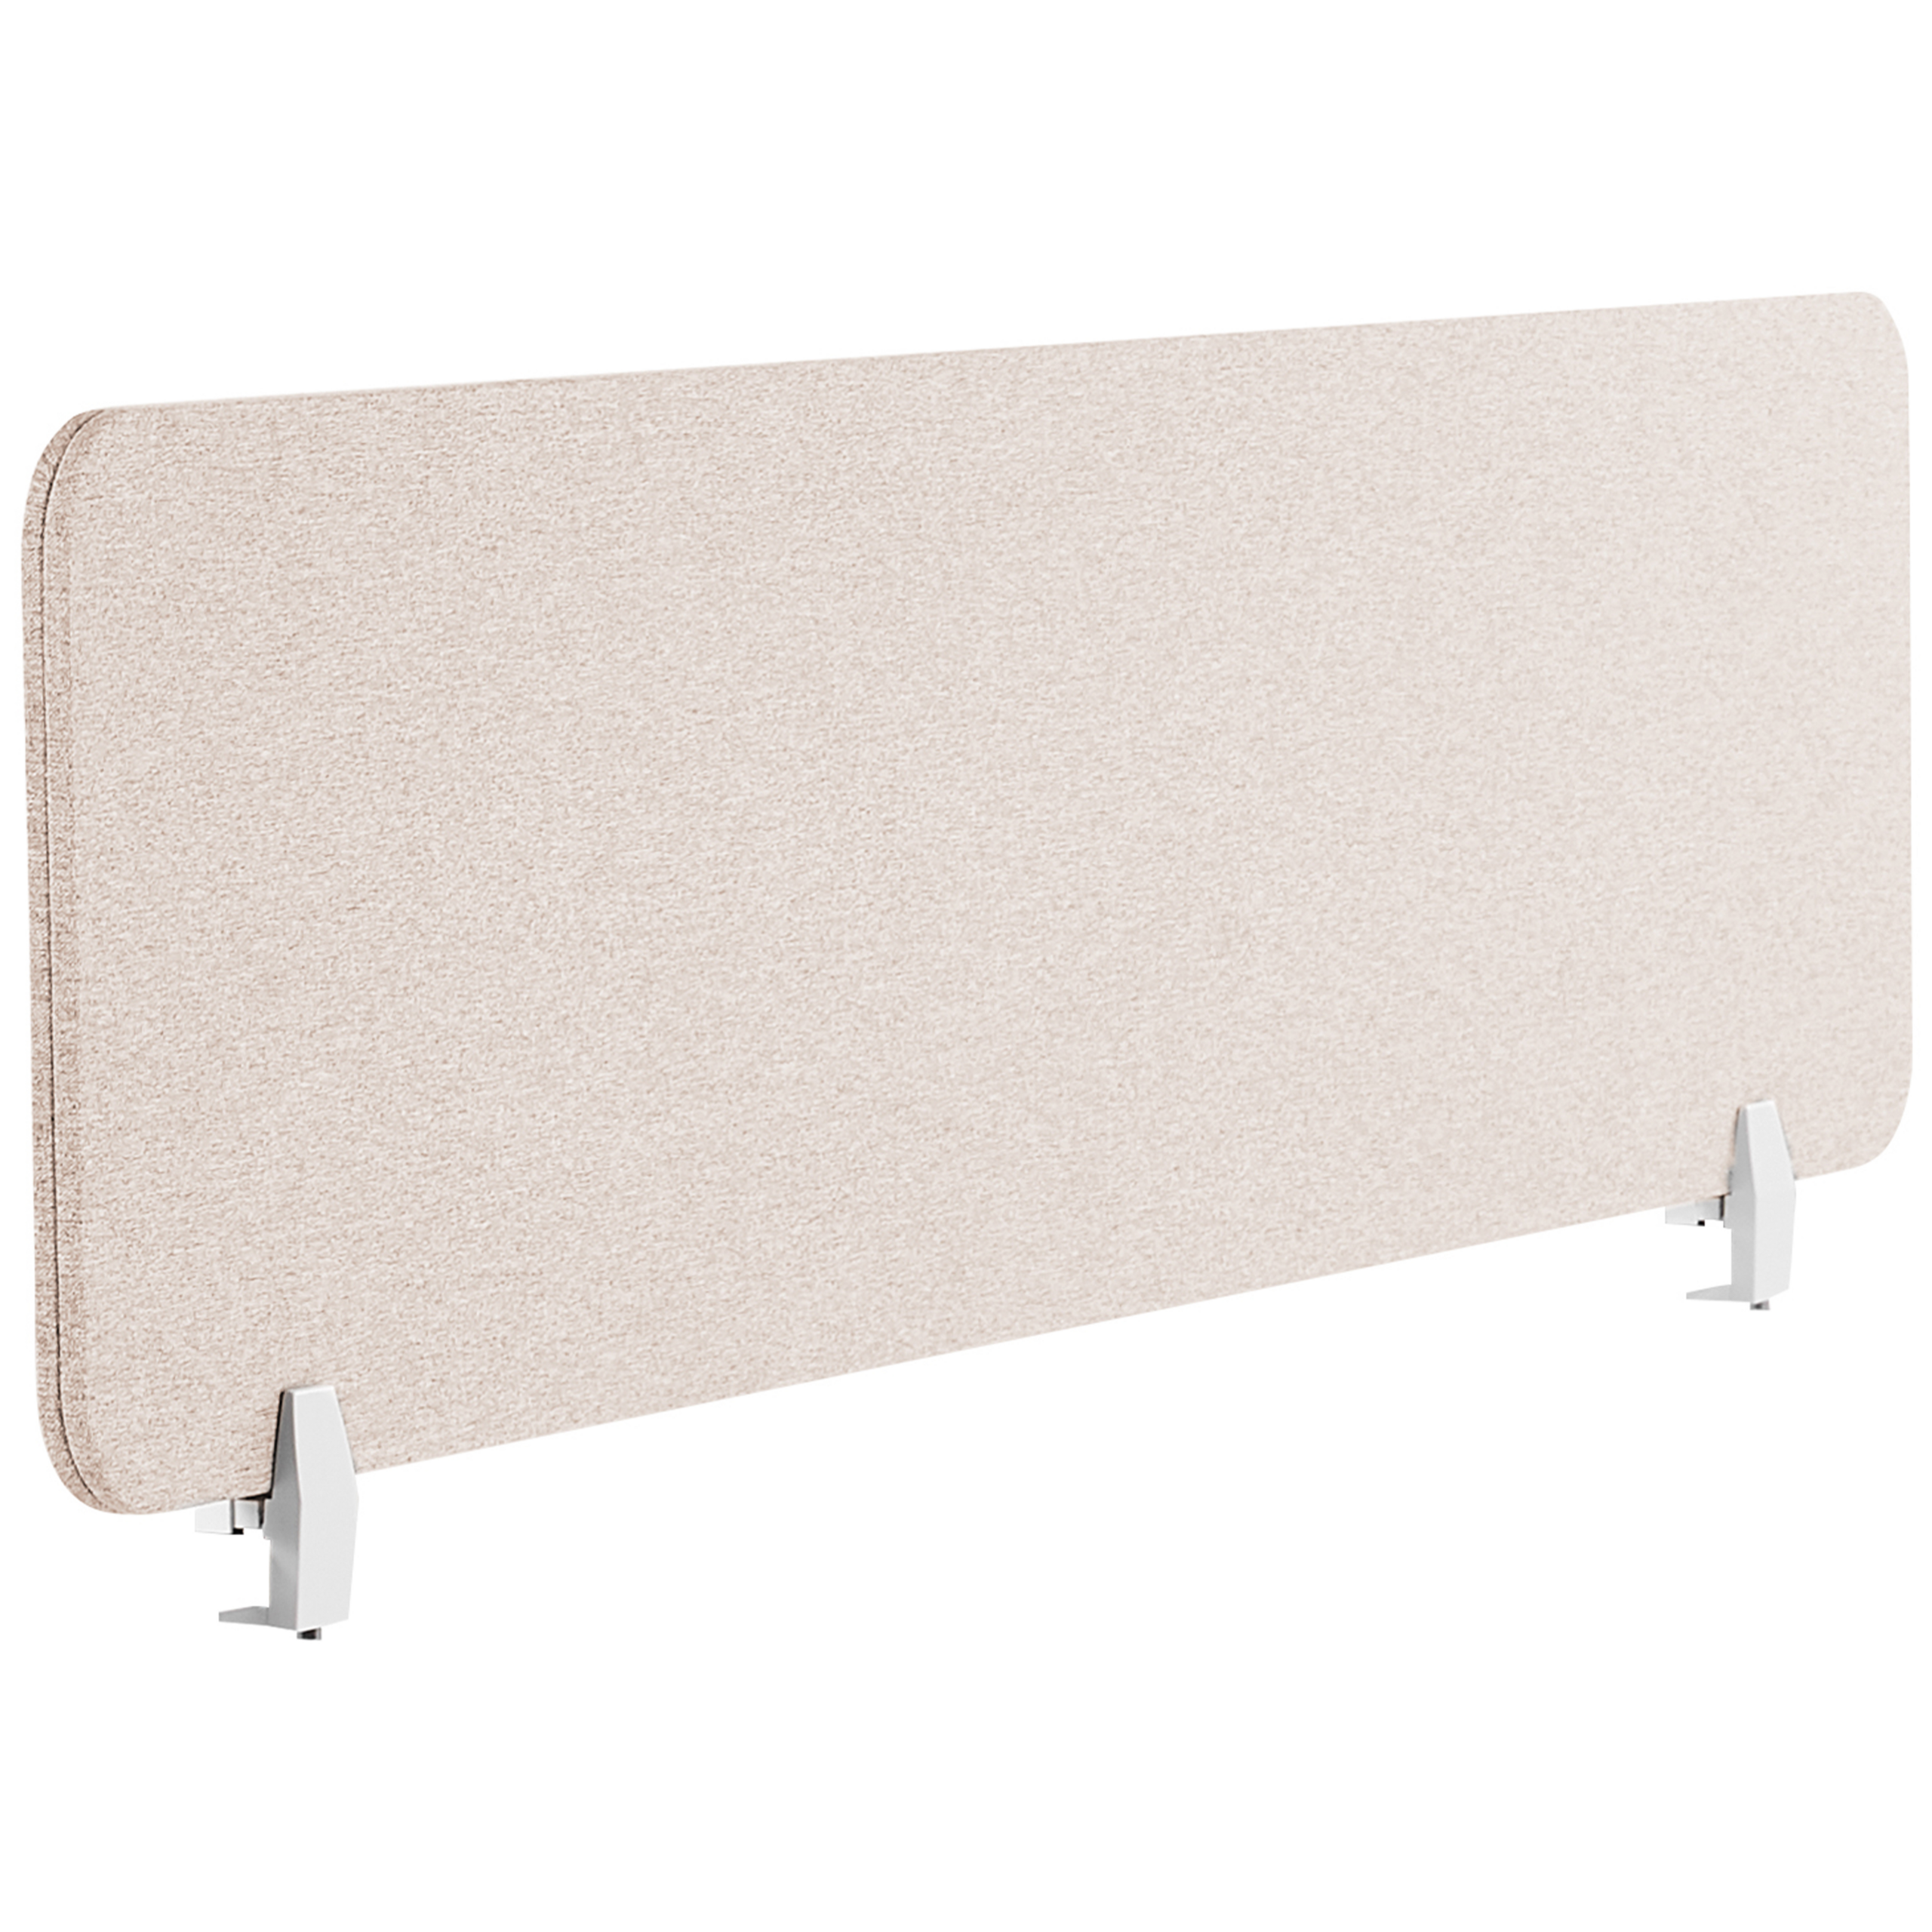 Beliani Desk Screen Beige PET Board Fabric Cover 160 x 40 cm Acoustic Screen Modular Mounting Clamps Home Office Material:Polyester Size:2x40x160